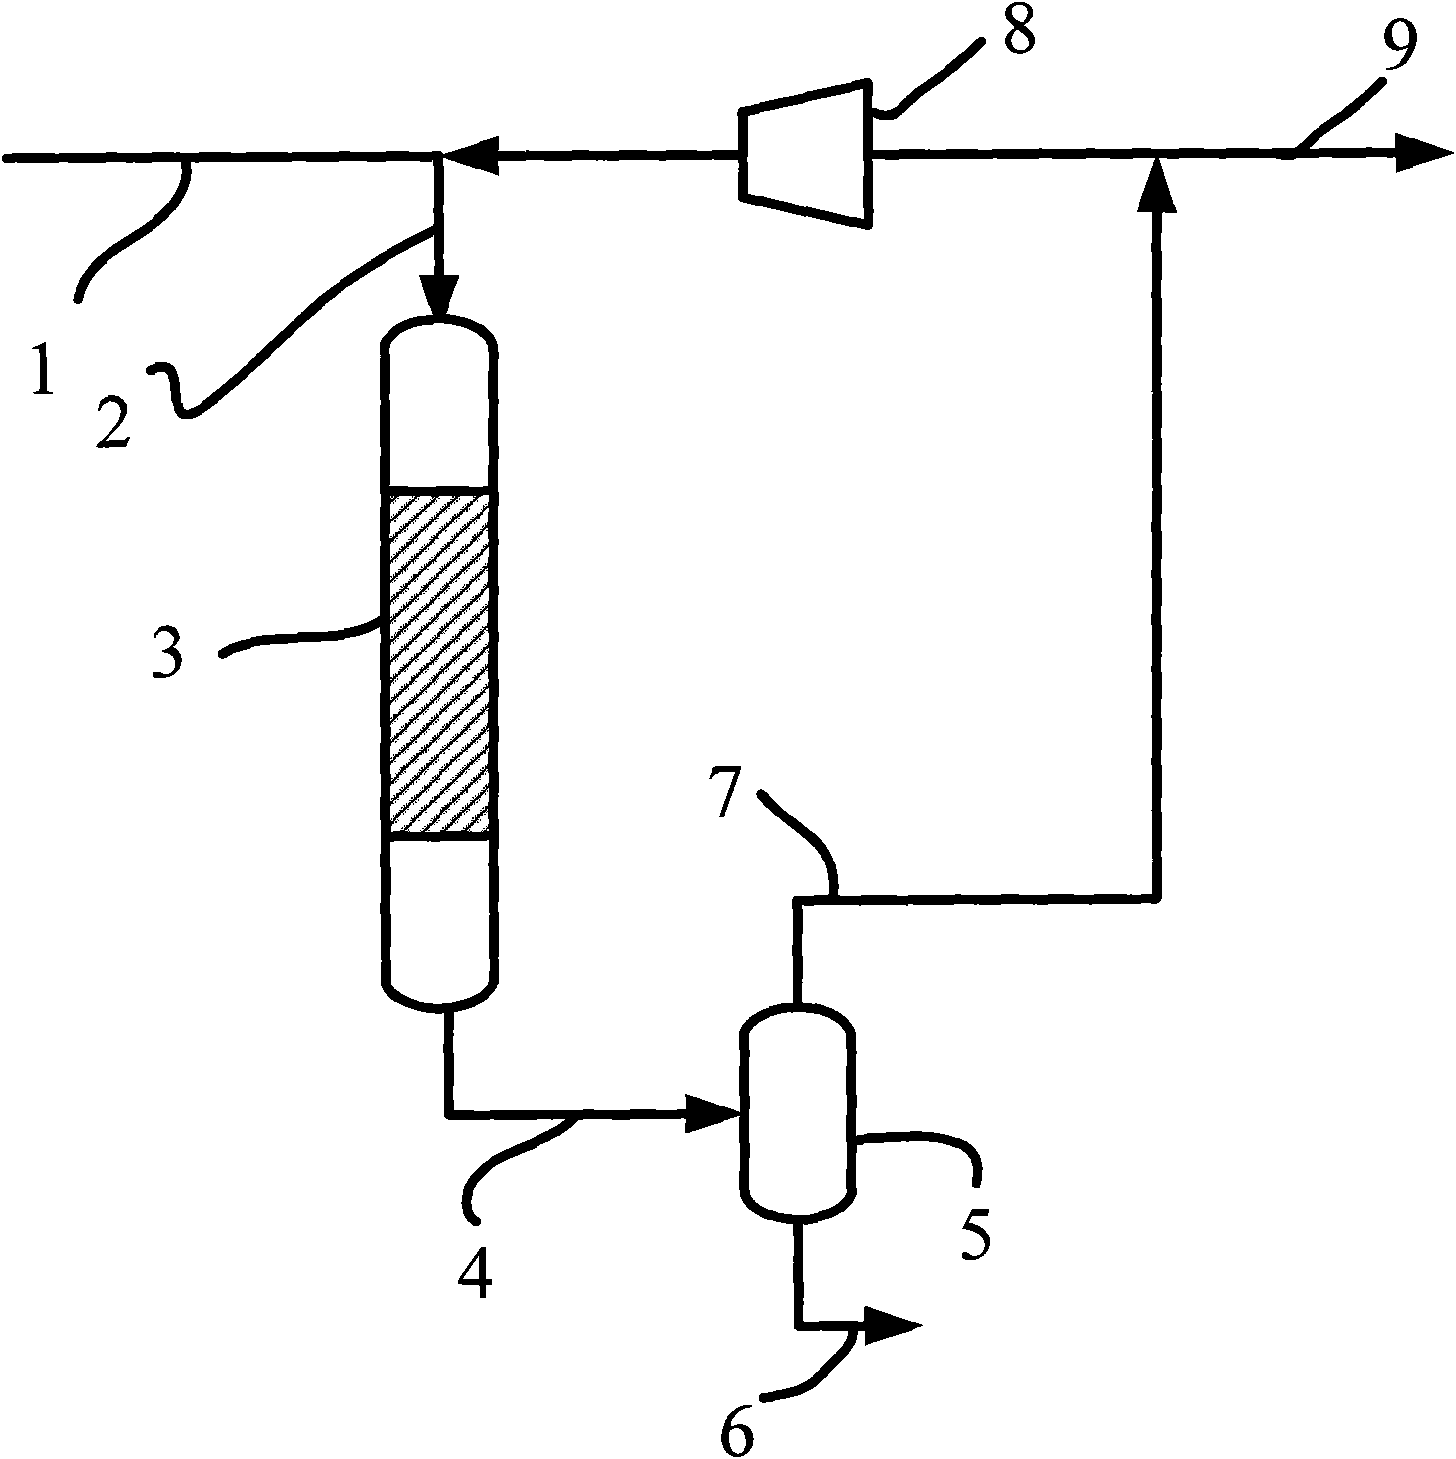 Method for coproducing substitute natural gas through coal liquefaction